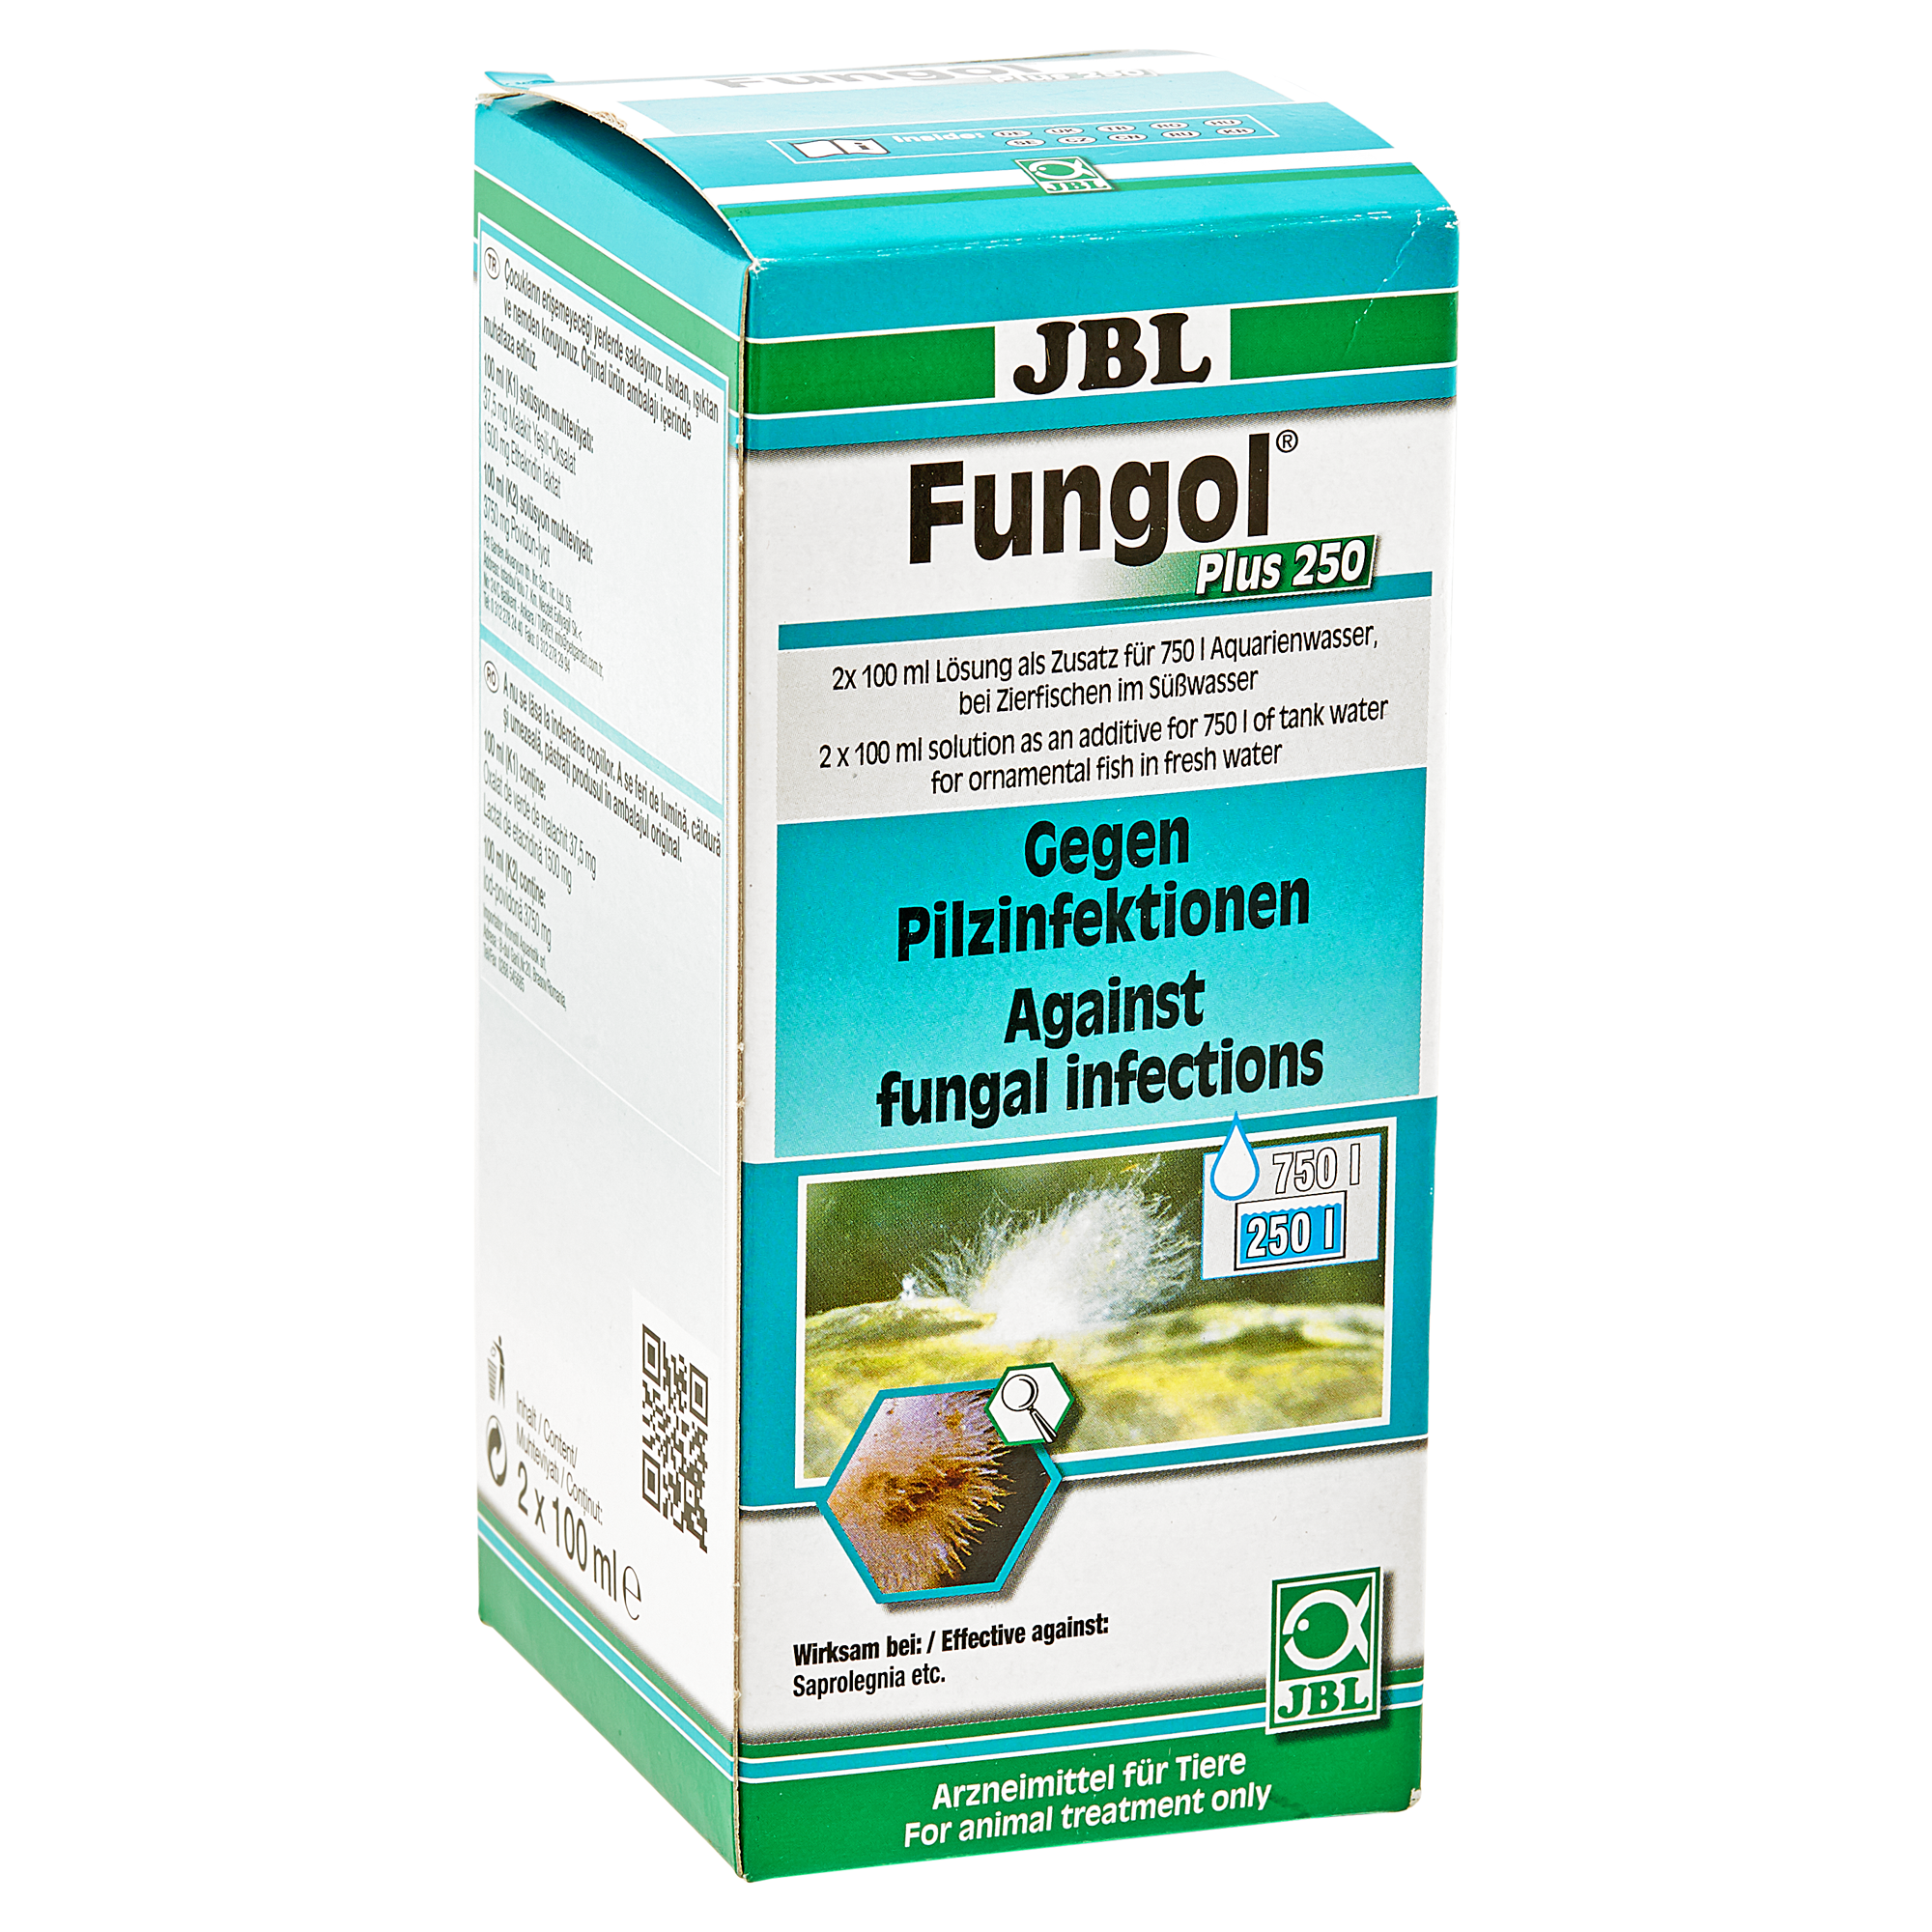 Fischarznei "Fungol Plus 250" 100 ml 2 Stück + product picture